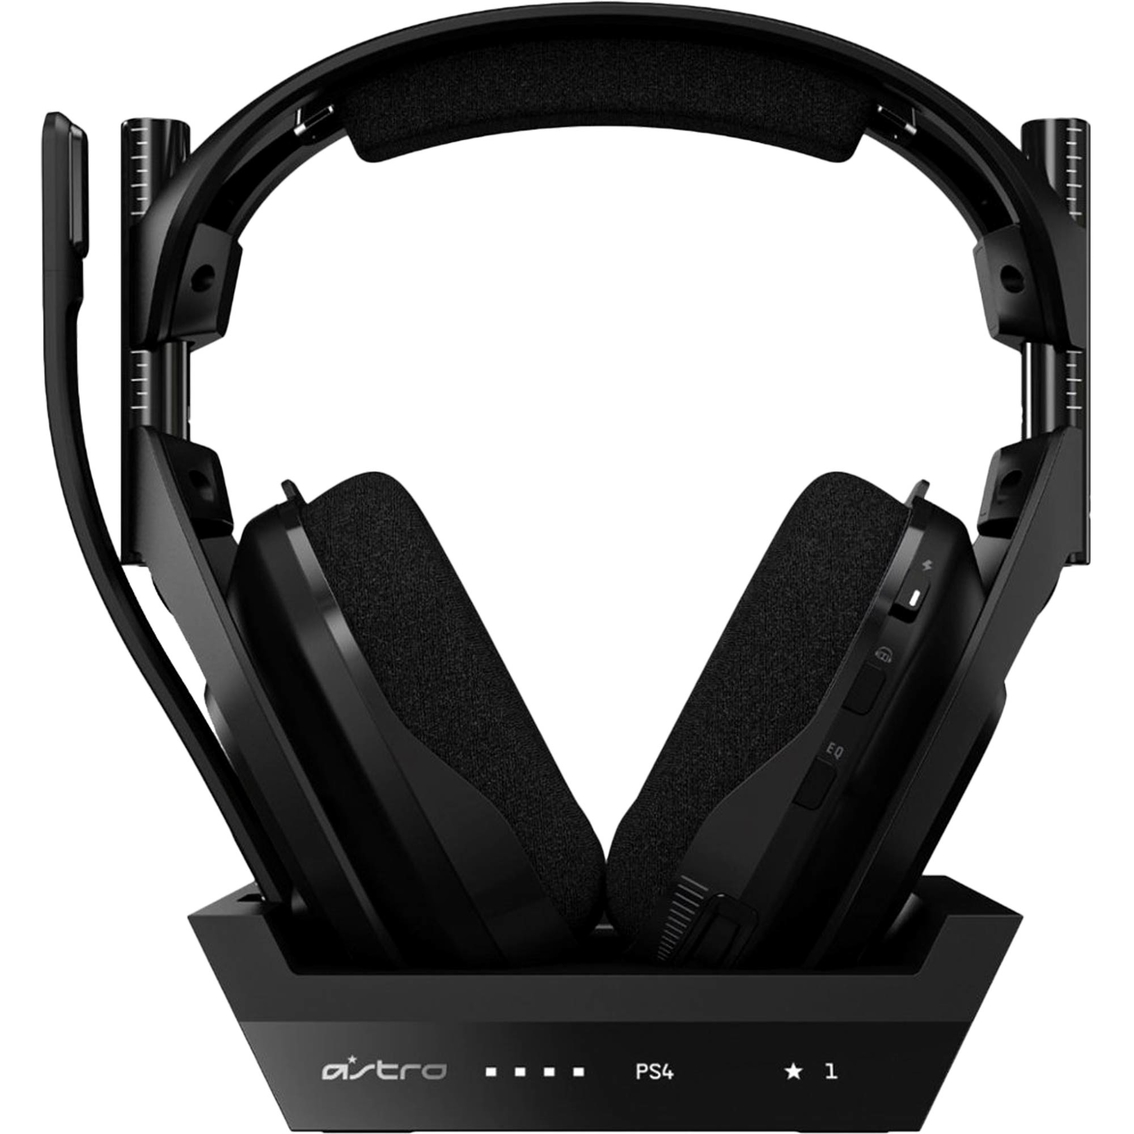 astro headset software download